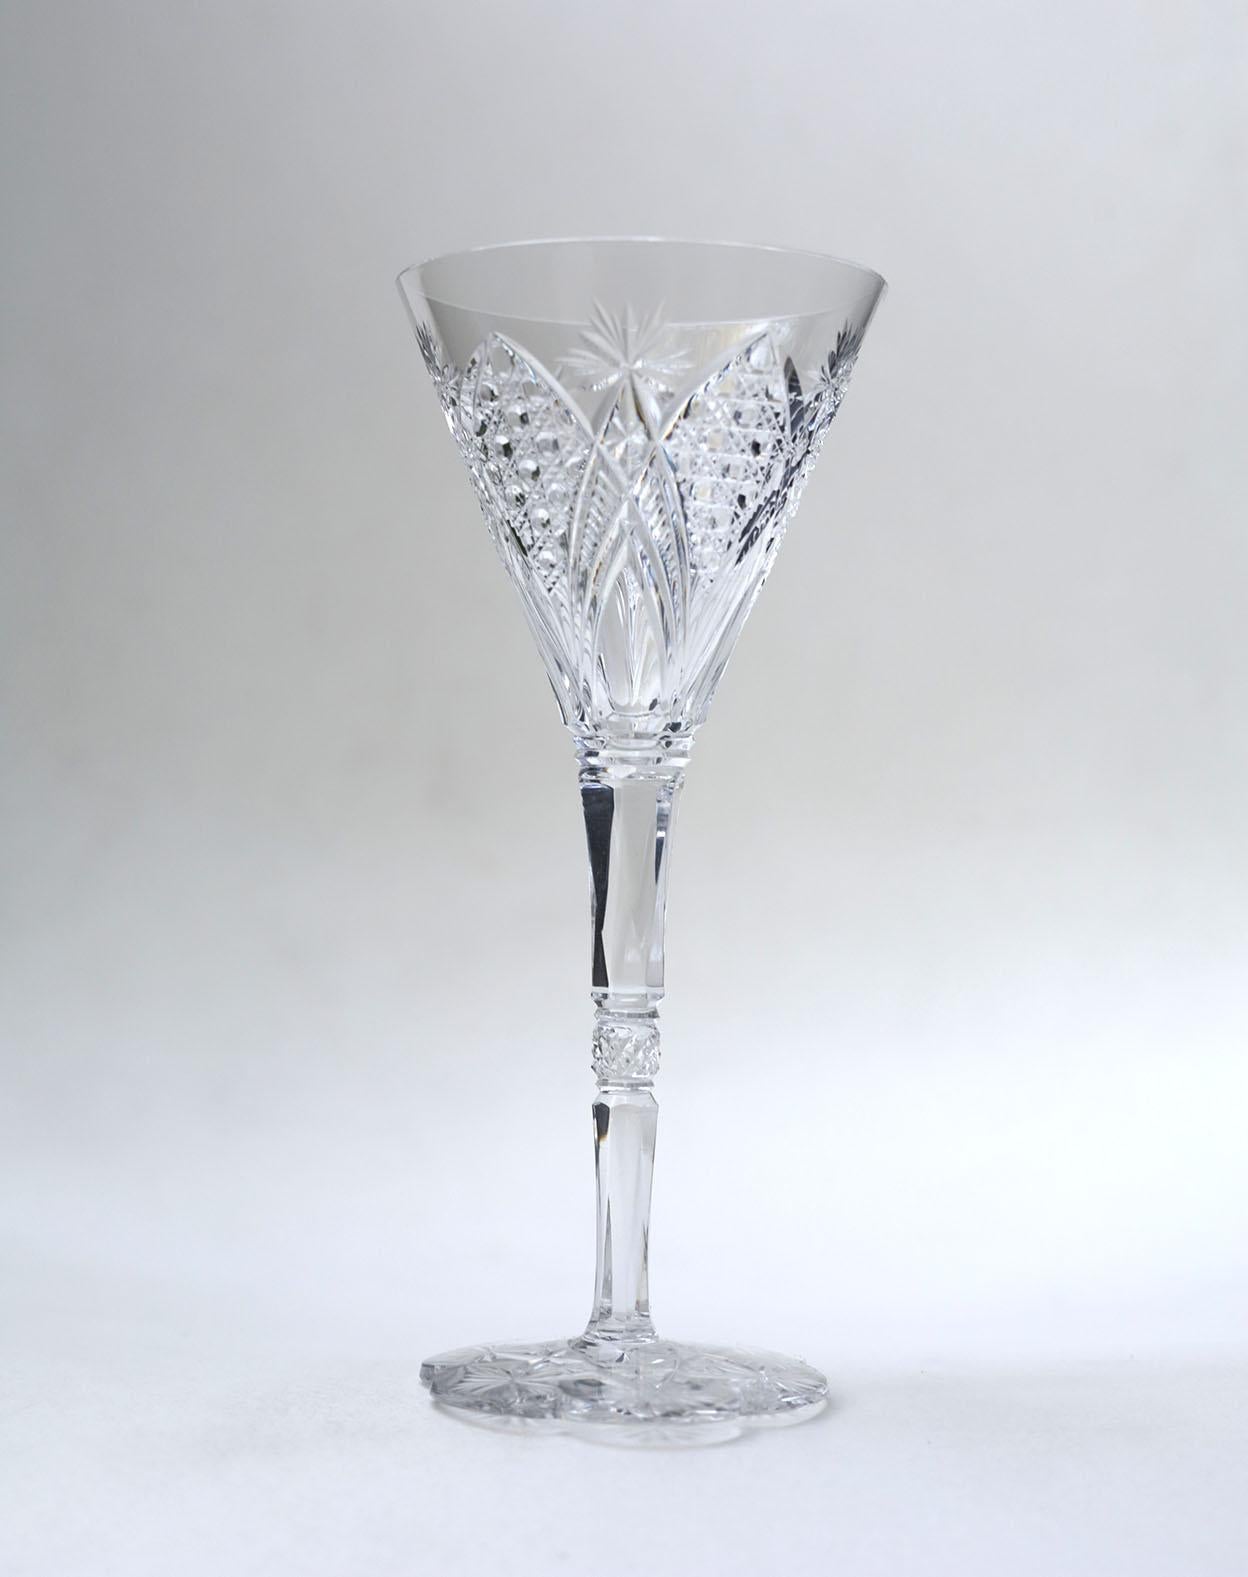 Baccarat Elbeuf service was first introduced in 1908 and presented at the International Exhibition in Nancy, France in 1909. Specially ordered in 1920 by the Maharaja of Baroda.
This set of 6 signed Baccarat glasses are hand blown clear crystal and